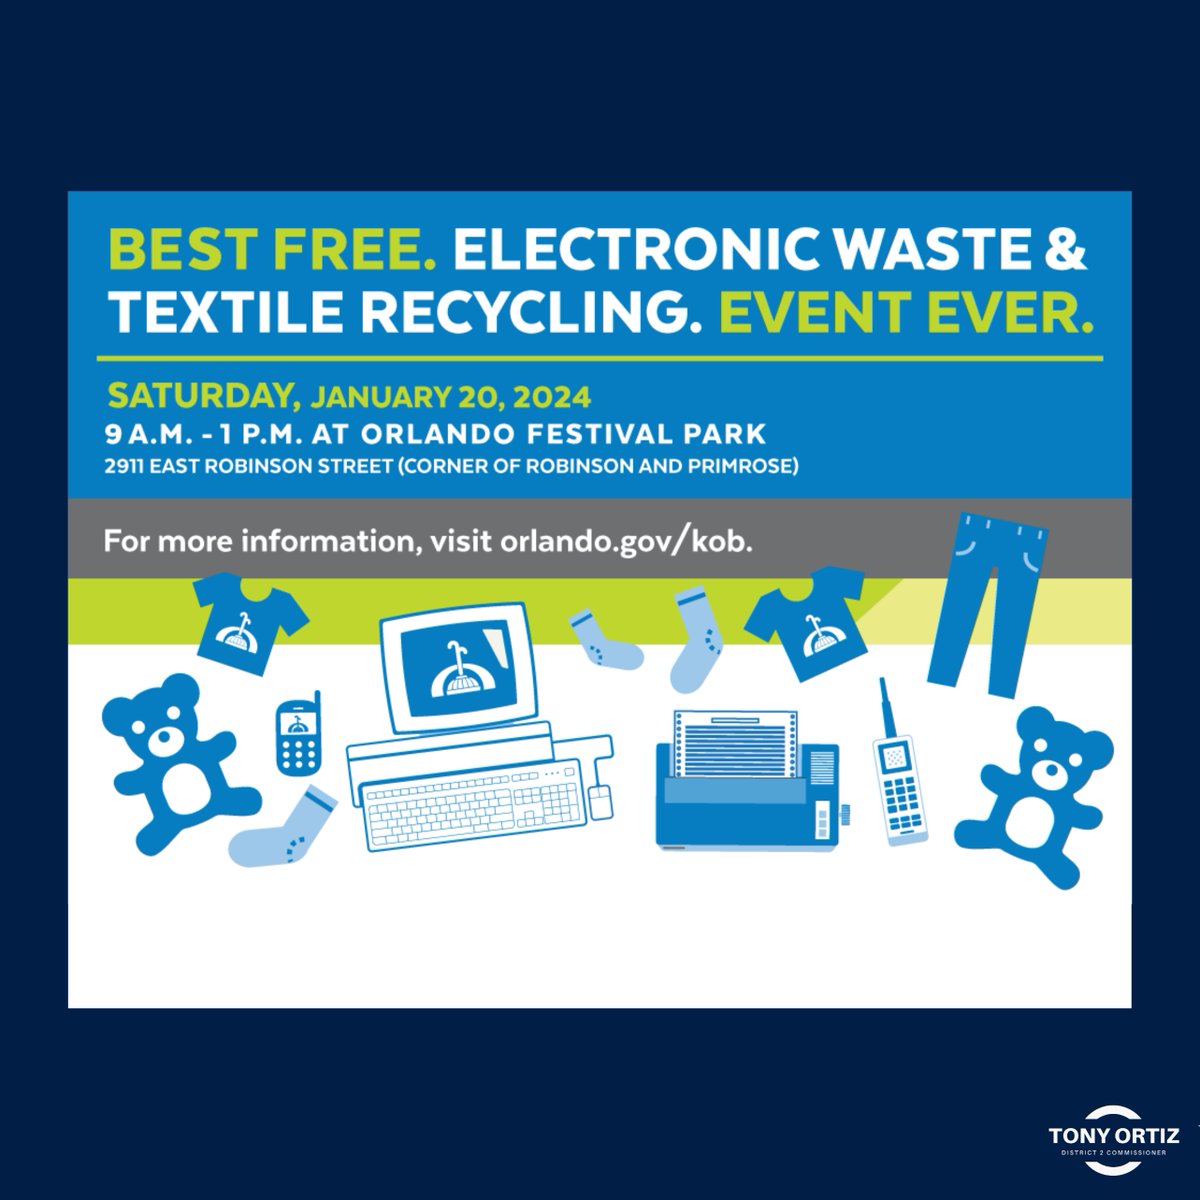 Revamp, Recycle, and Reimagine! Join us at Orlando Festival Park for Keep Orlando Beautiful's FREE Electronic Waste and Textile Recycling Event. #KeepOrlandoBeautiful #RecycleForChange #TeamOrtiz